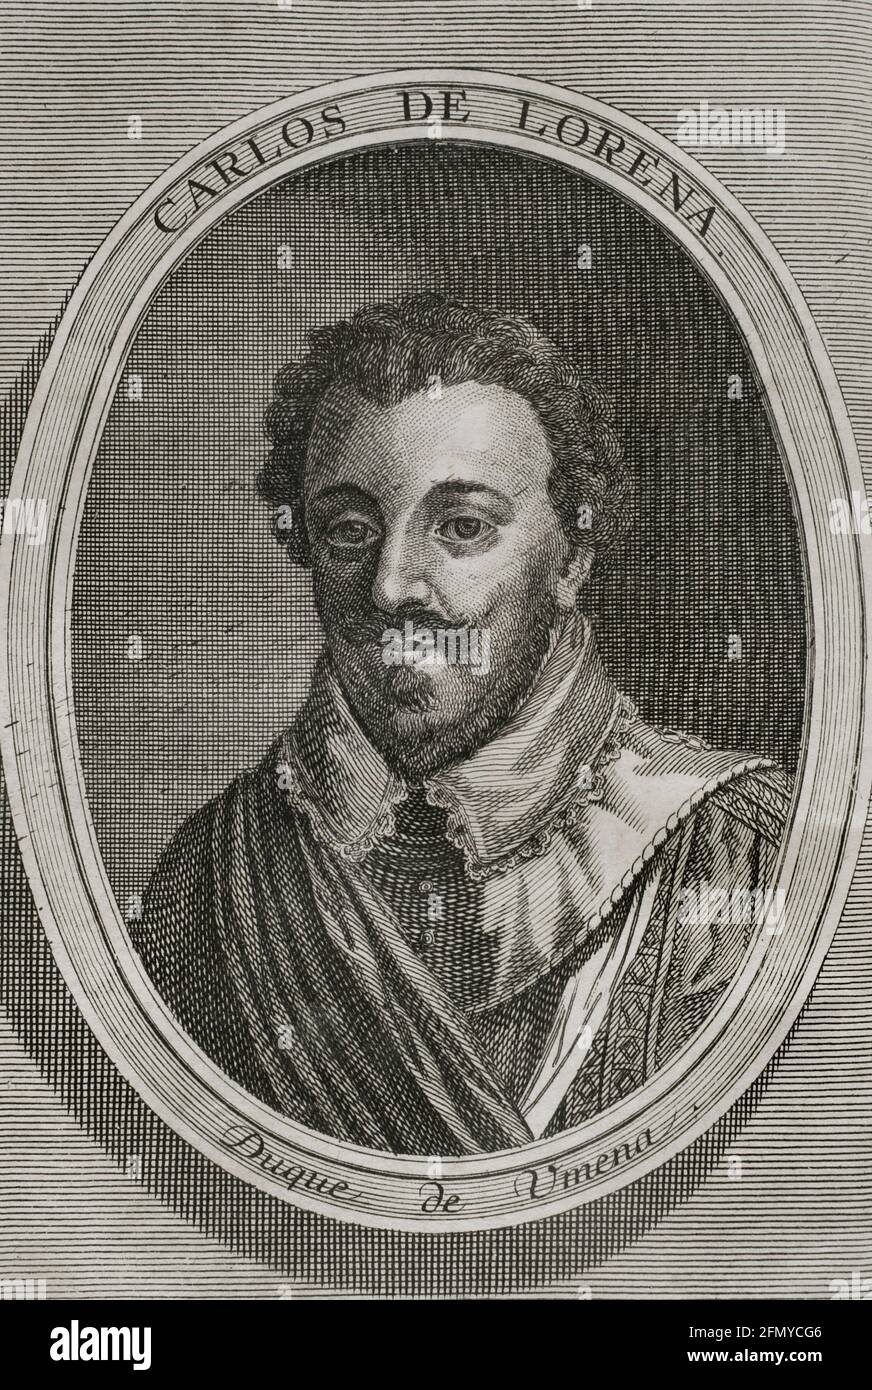 Charles of Lorraine, Duke of Mayenne (1554-1611). French nobleman. Military leader of the Catholic League. Portrait. Engraving. Wars of Flanders. Edition published in Antwerp, 1748. Stock Photo